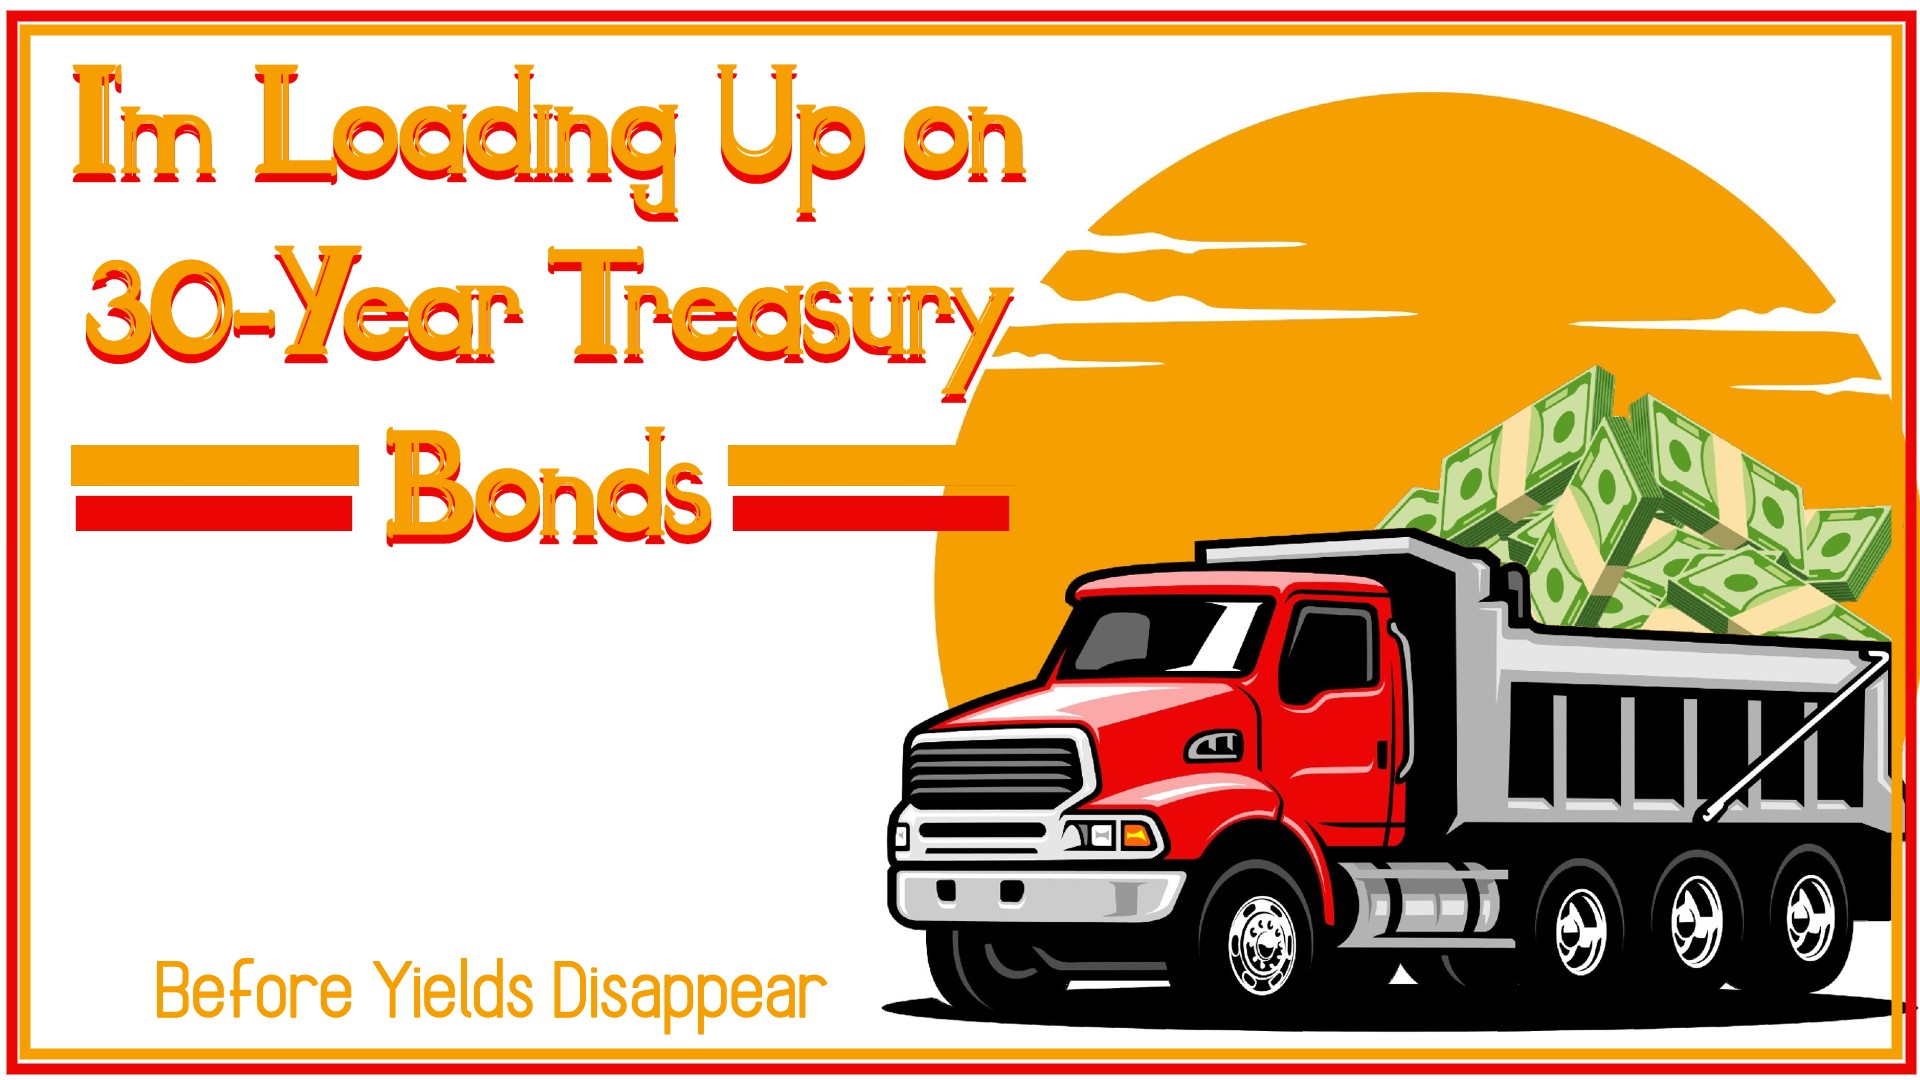 Im Loading Up on 30-Year Treasury Bonds: Before Yields Disappear